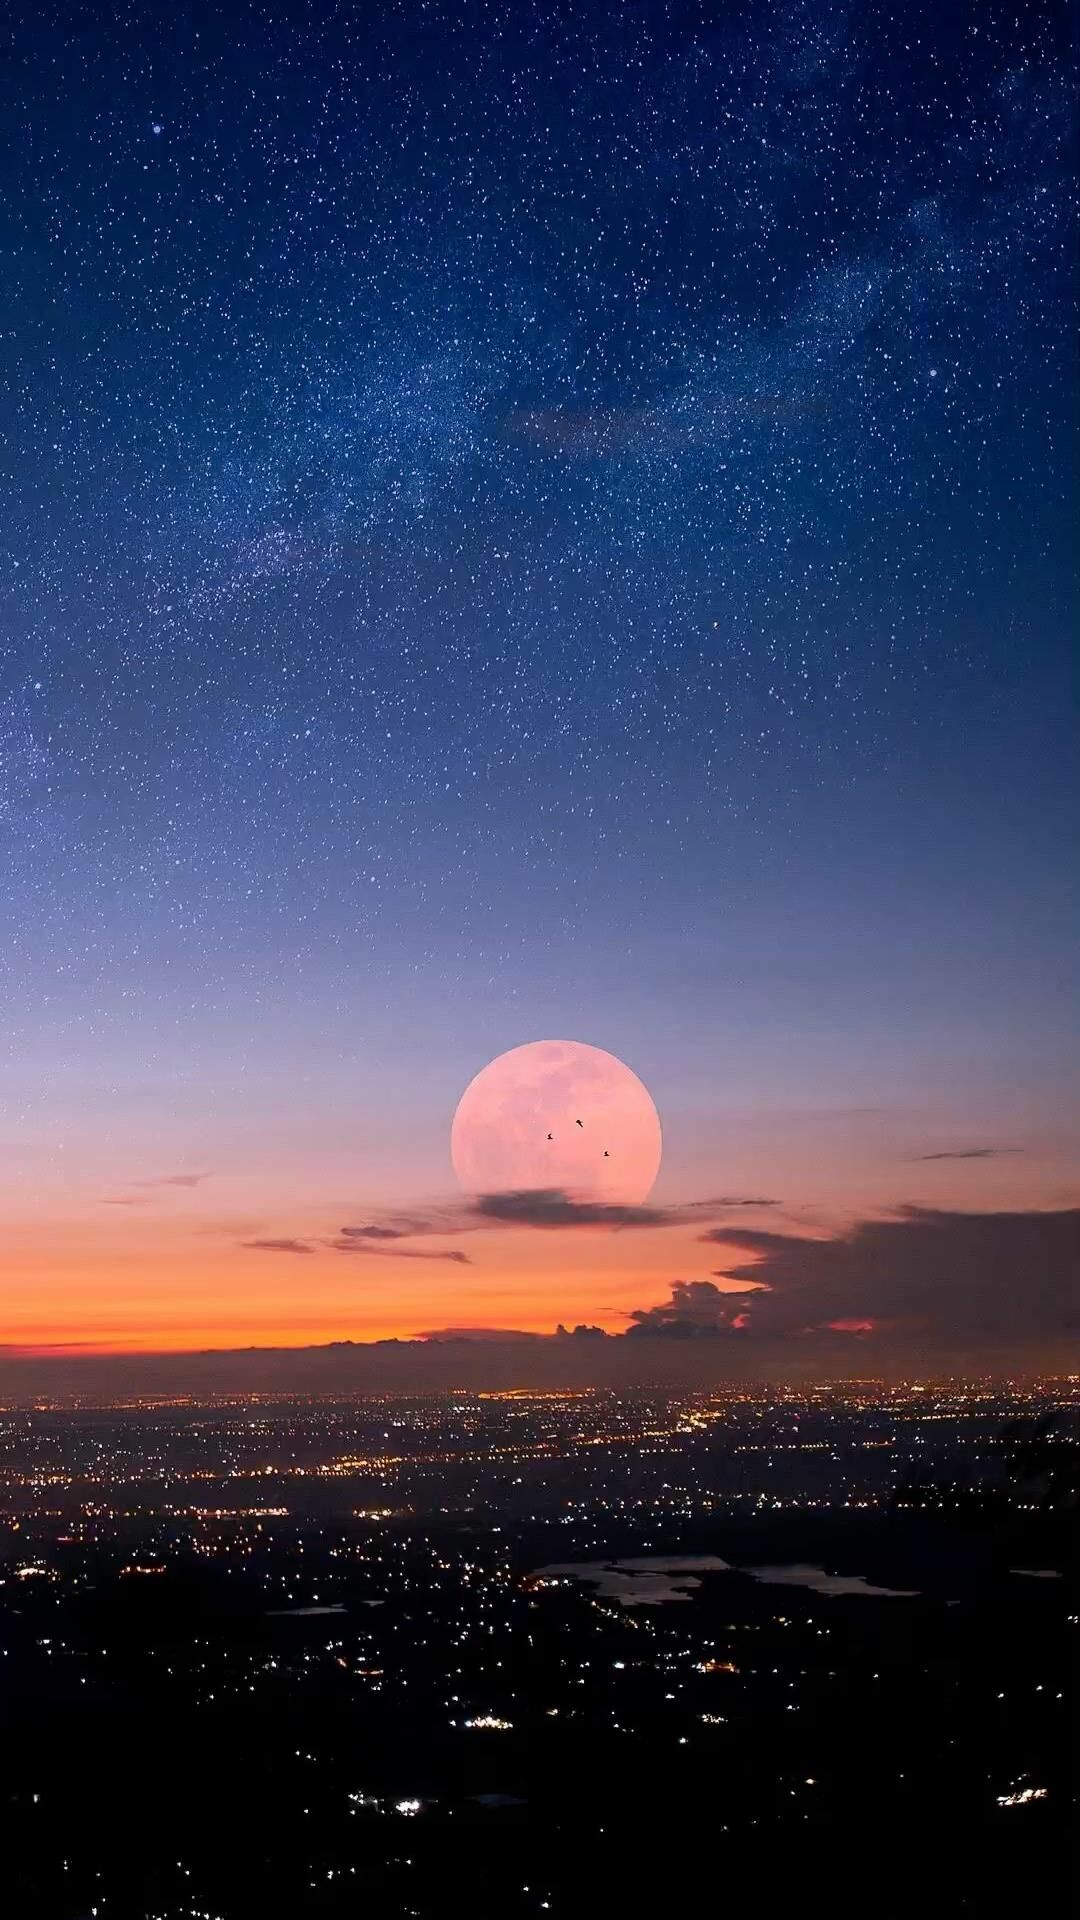 Moon: Twilight, Lunar disk viewed from Earth, Moonscape. 1080x1920 Full HD Wallpaper.